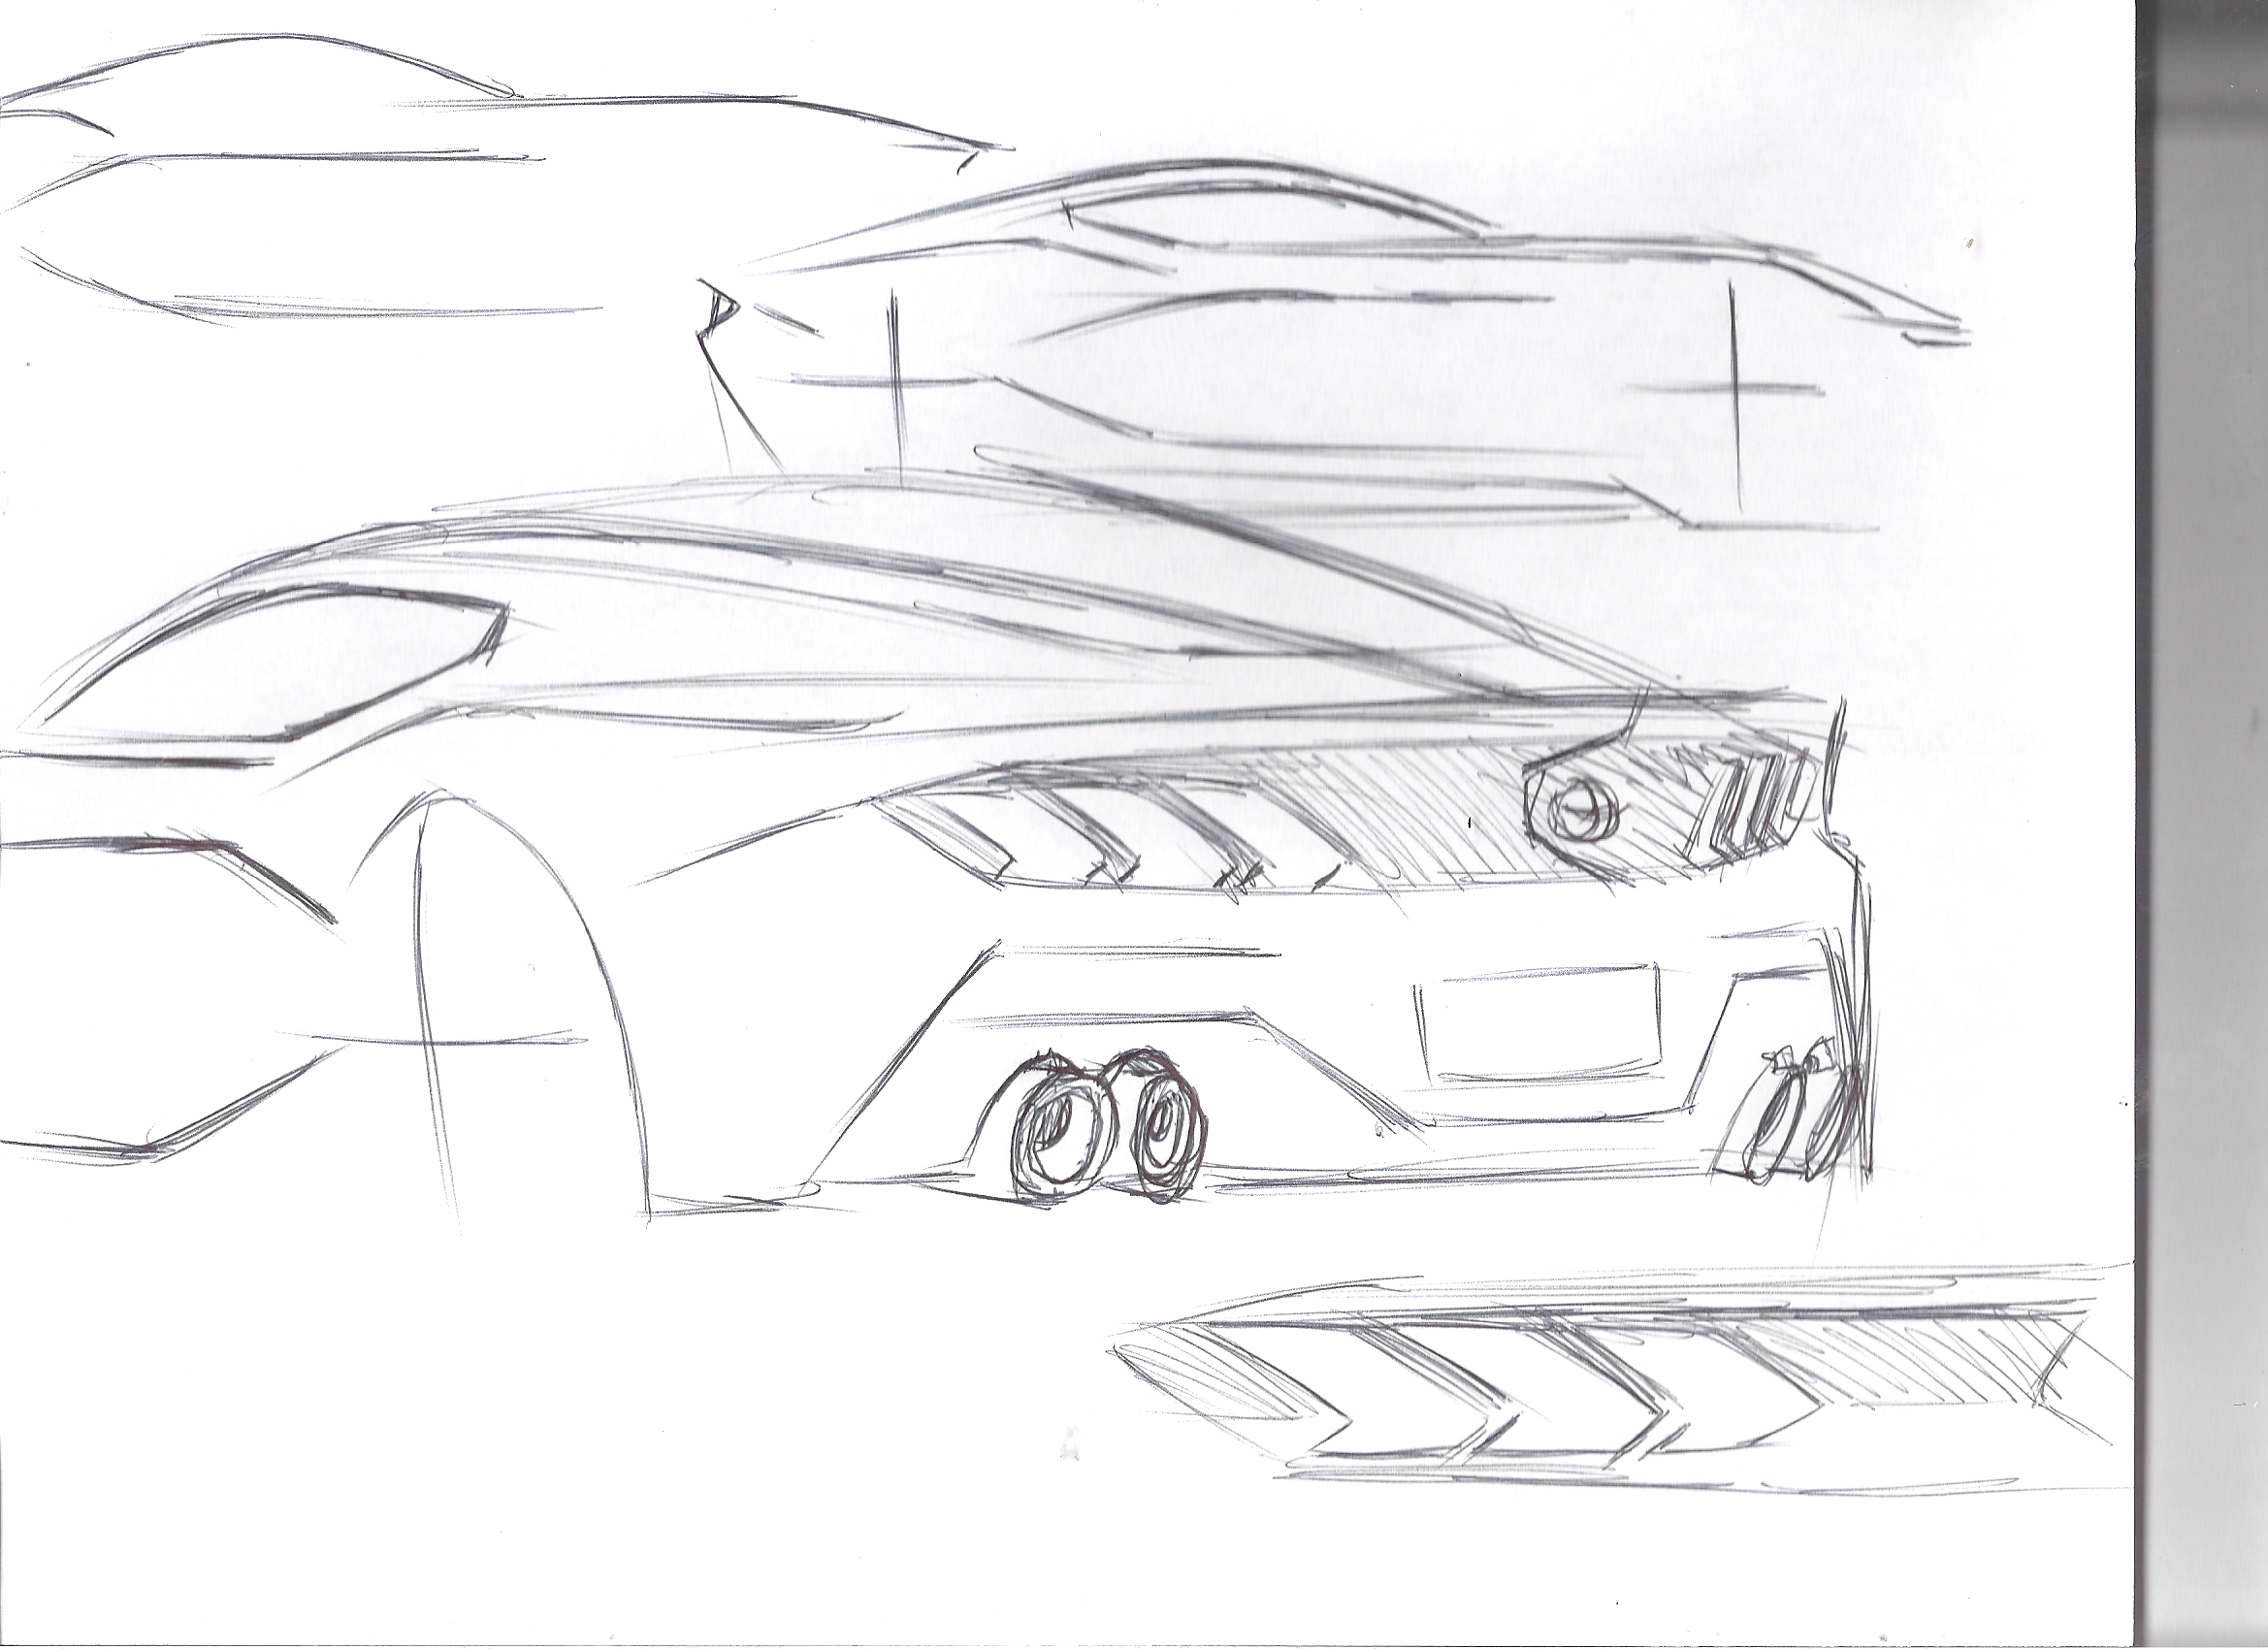 S650 Mustang S650 Rear End Rendering Mustang design sketches